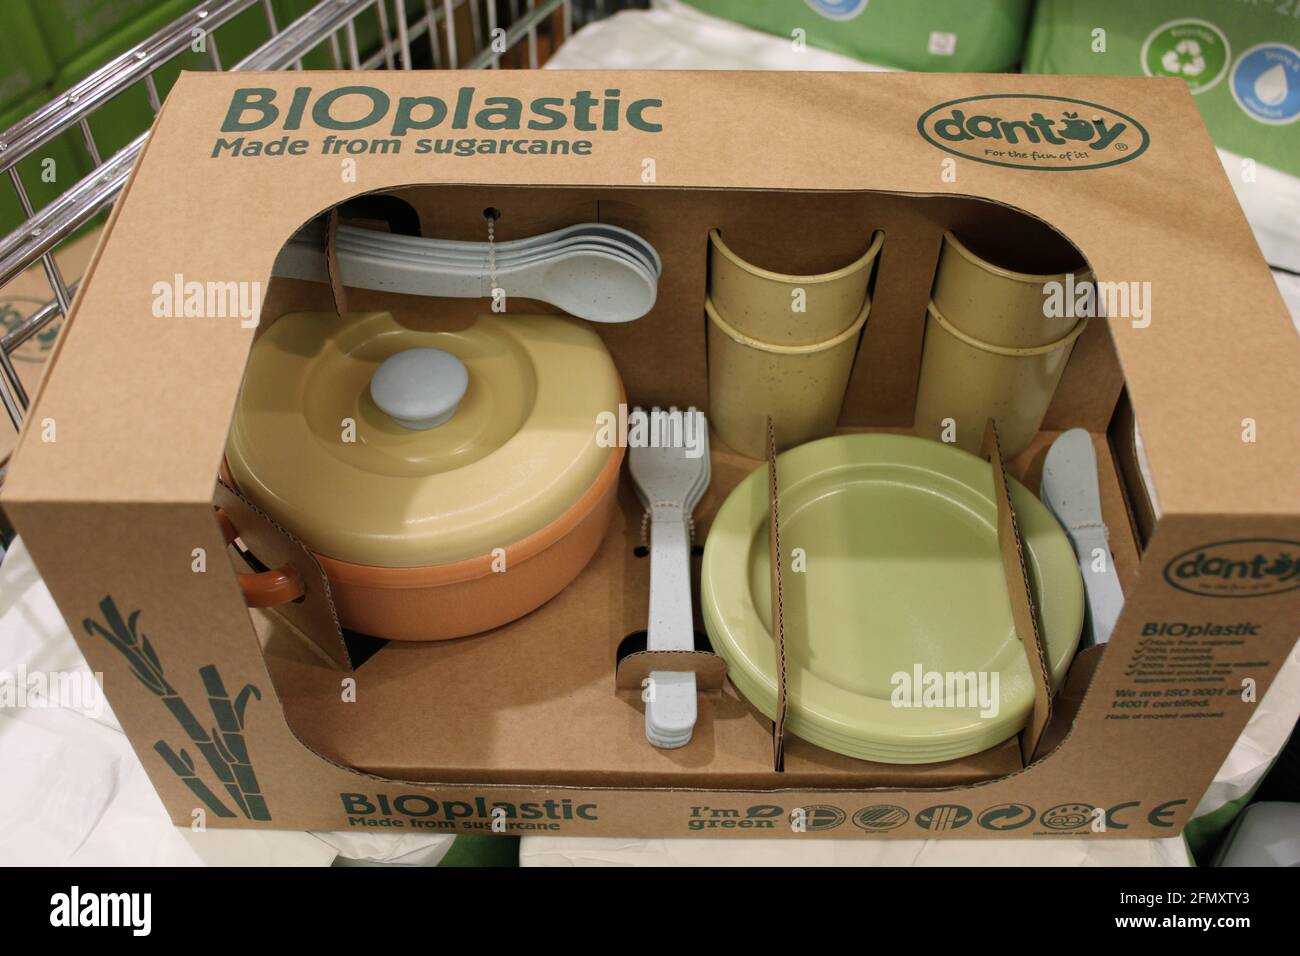 Childs dinner play set made from sugarcane. Bioplastic sustainably and eco friendly toys concept Stock Photo